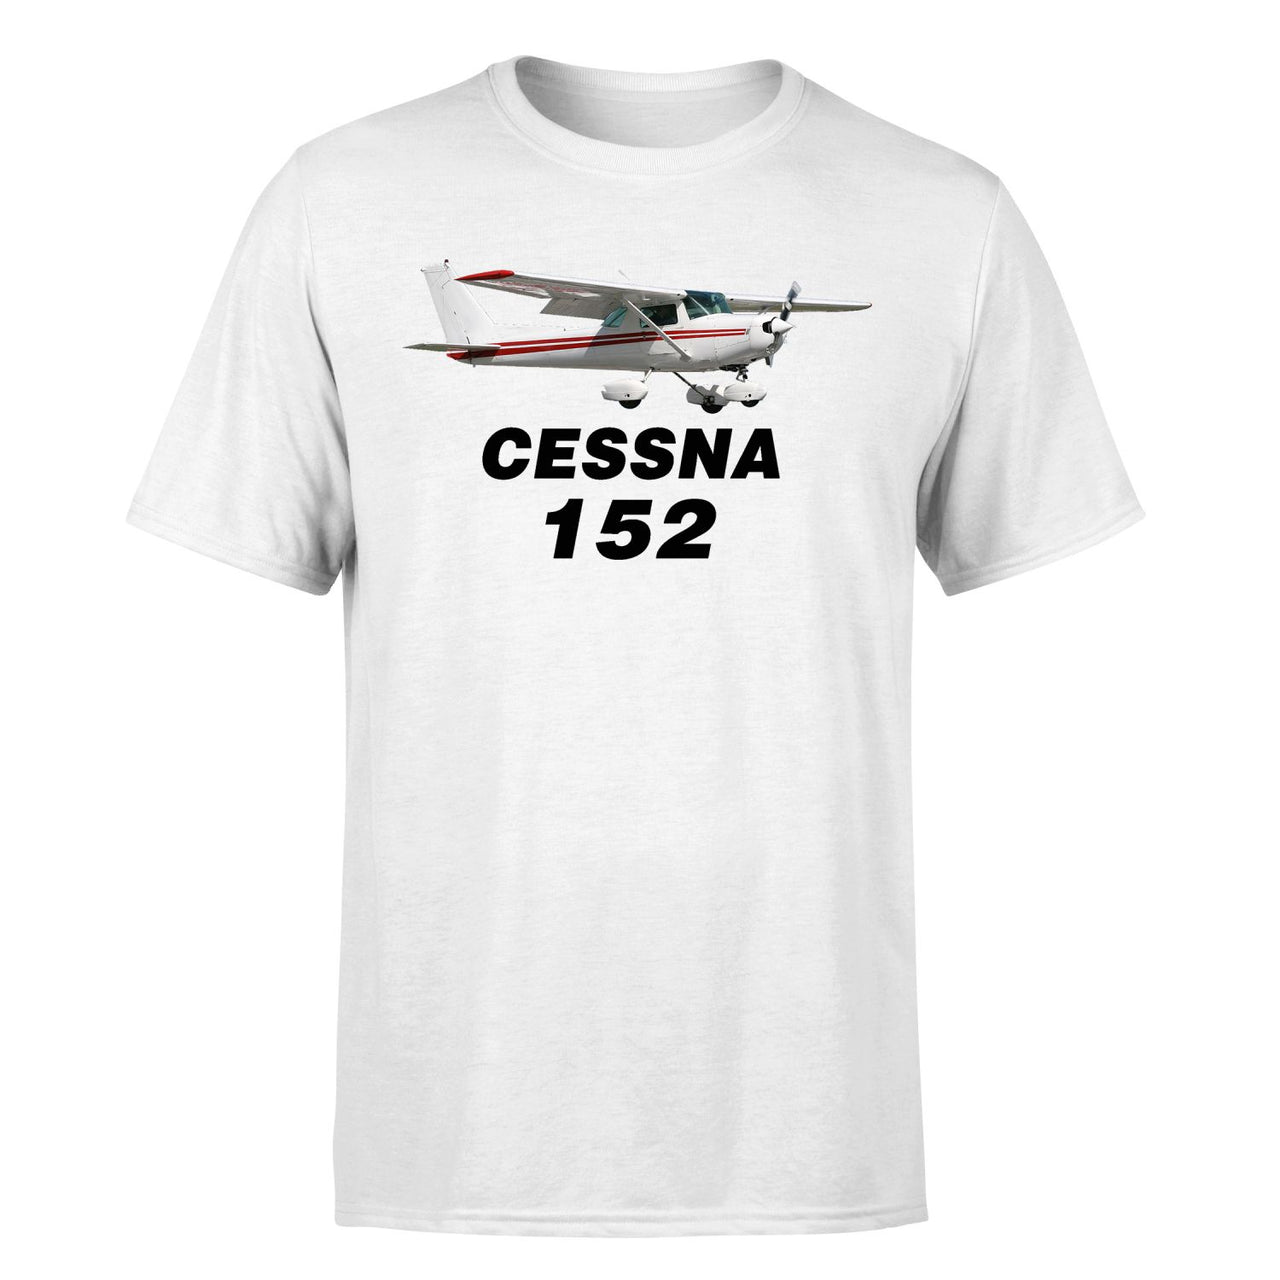 The Cessna 152 Designed T-Shirts